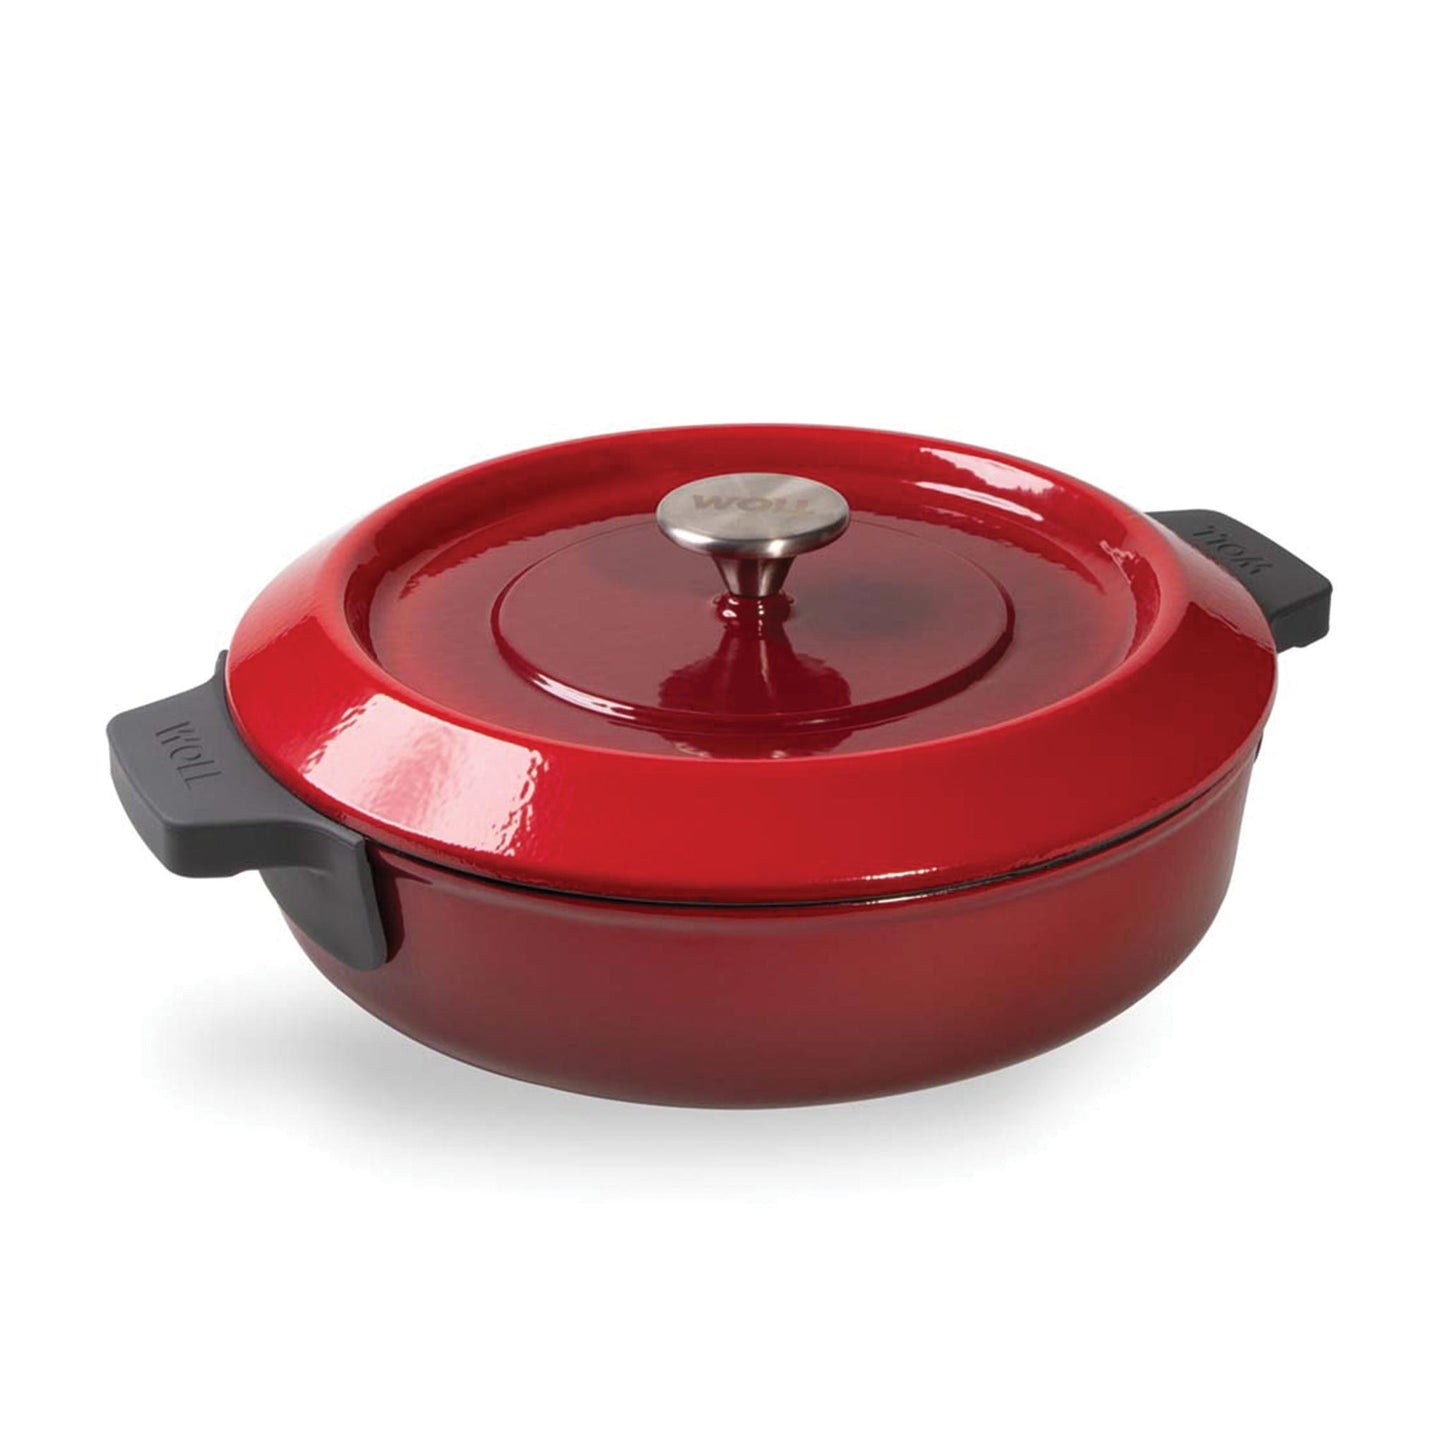 WOLL Cast Iron Covered Casserole